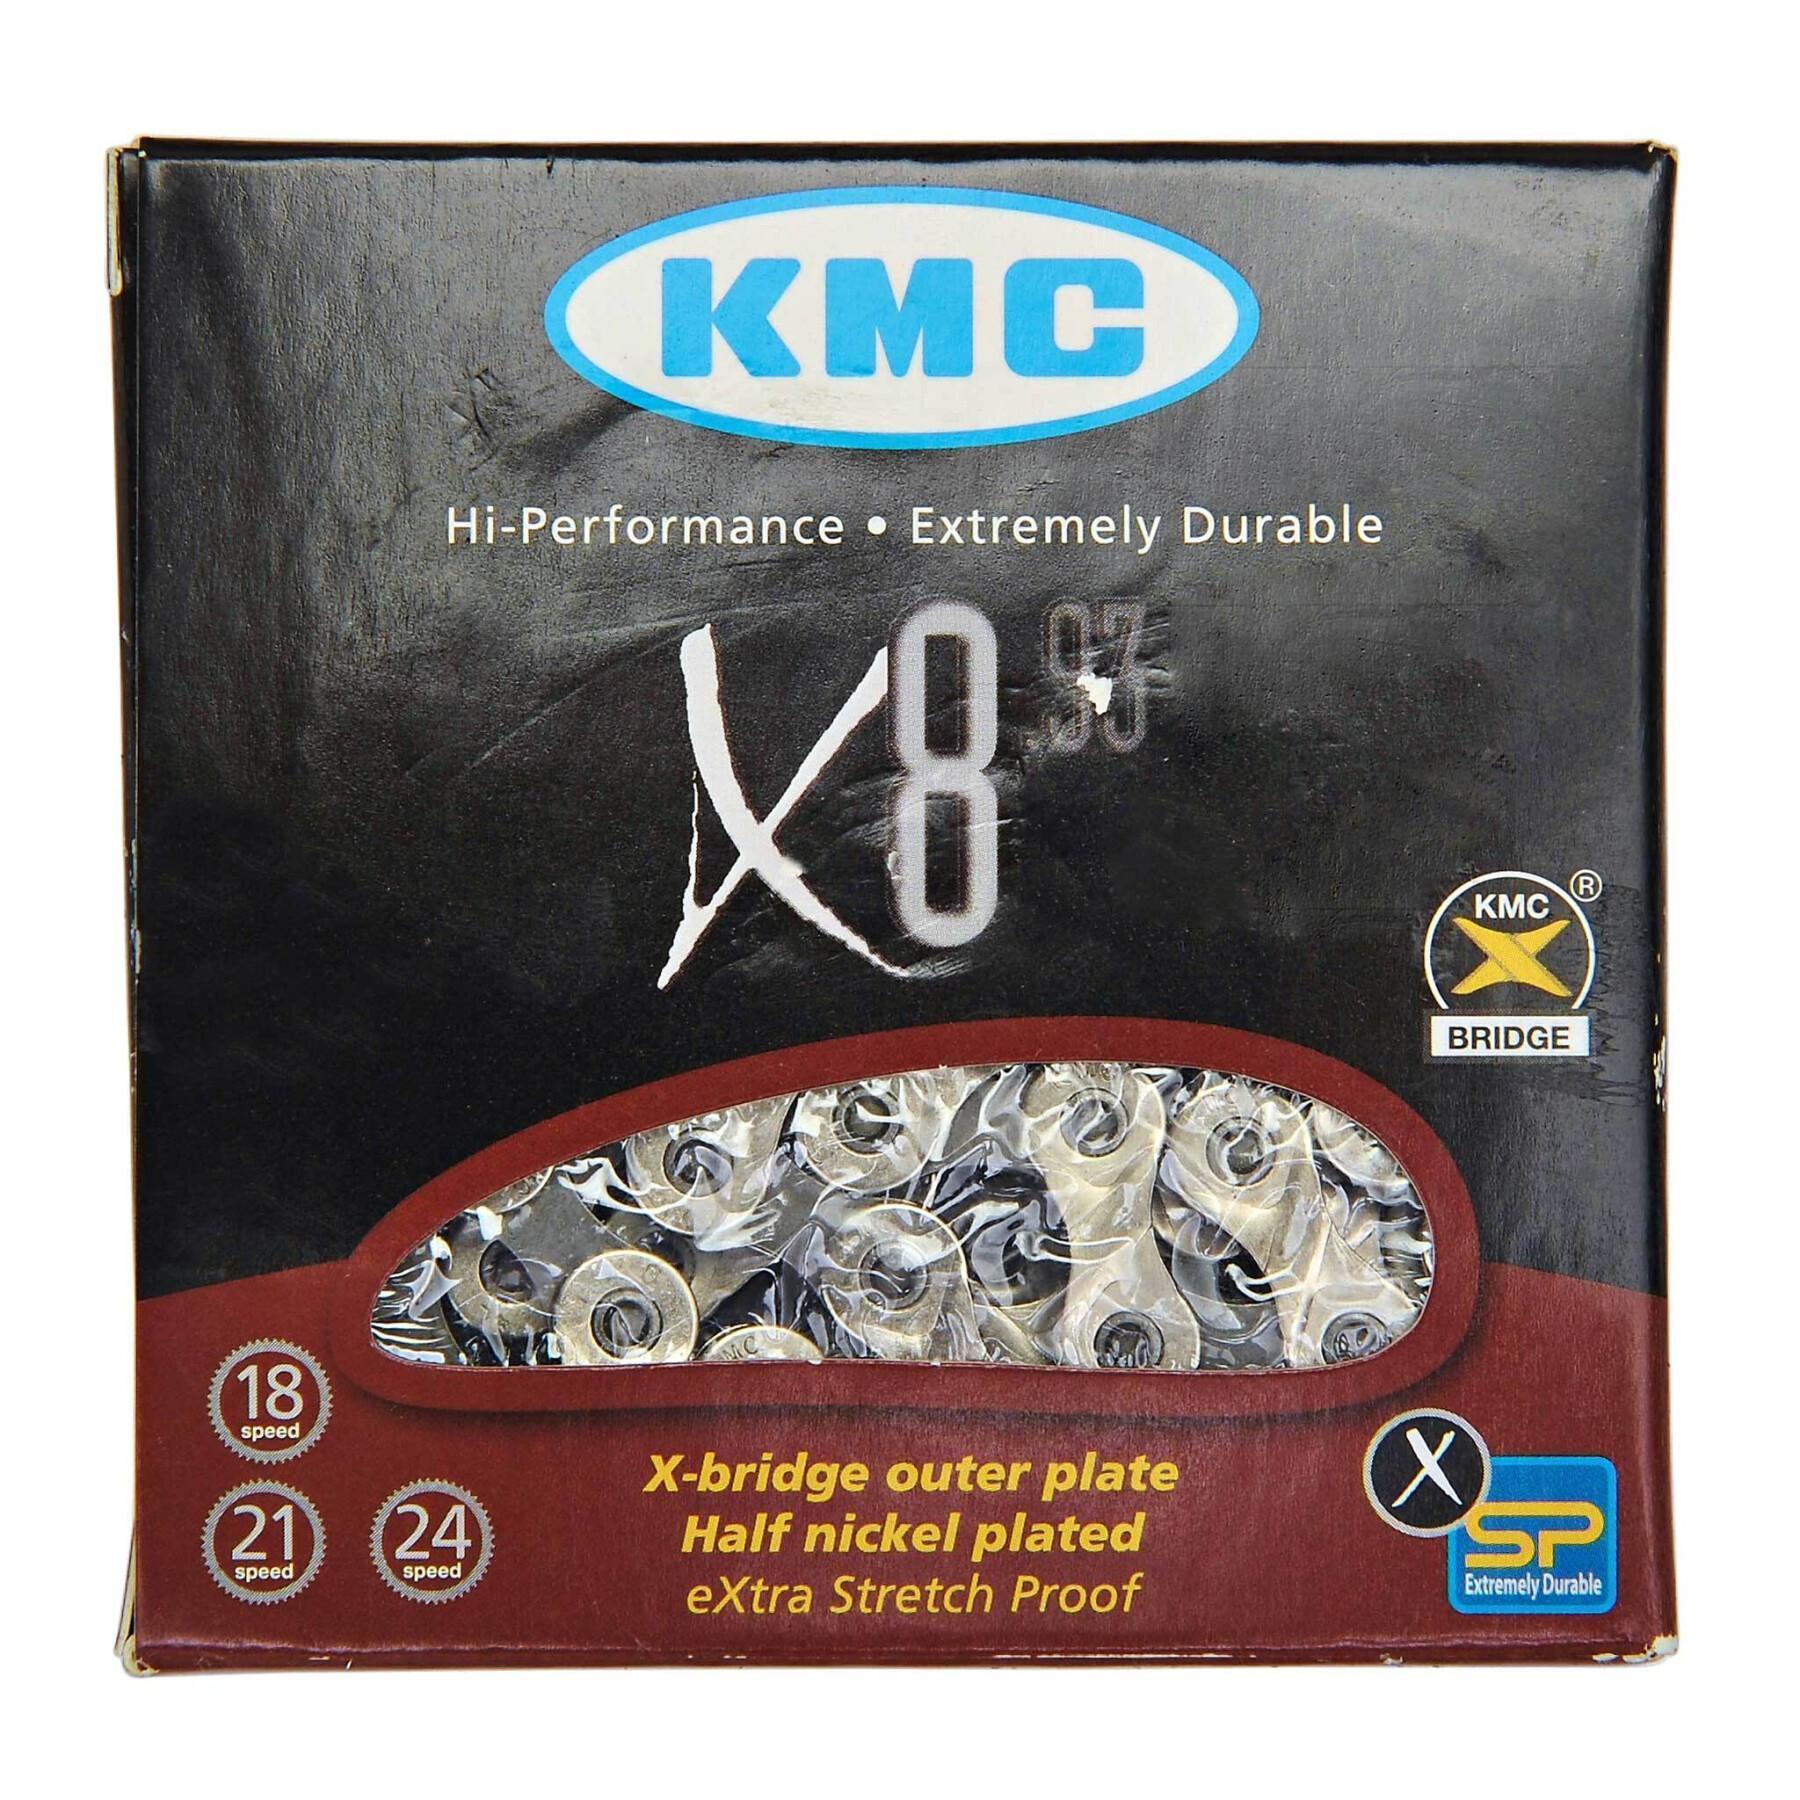 Channel KMC X8 8V